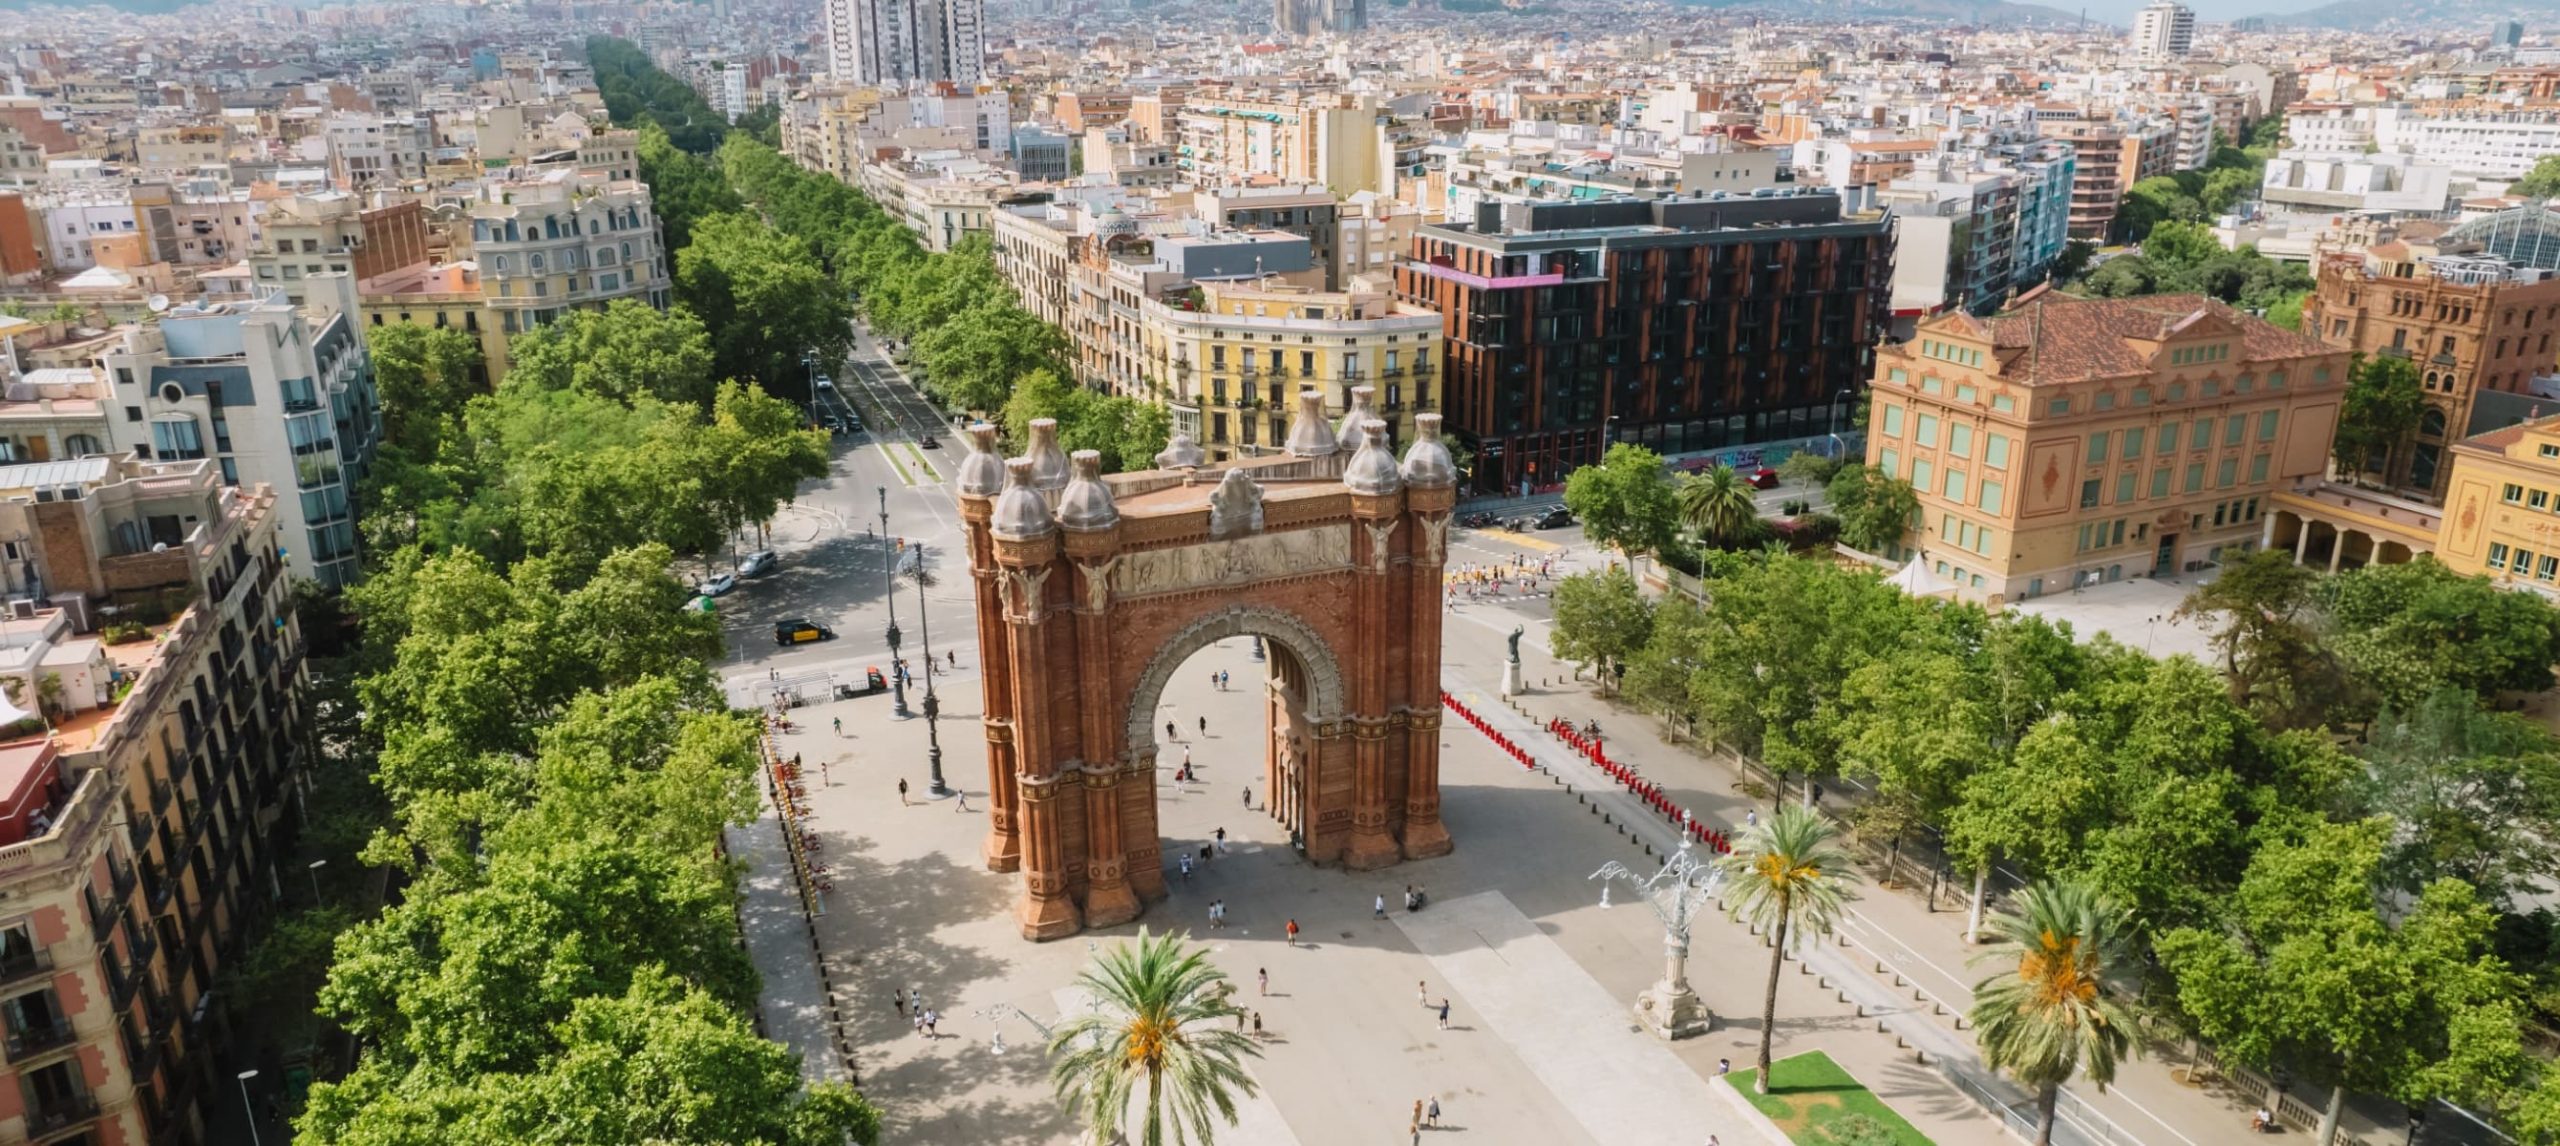 50 + Interesting & Fun Facts About Barcelona, Spain